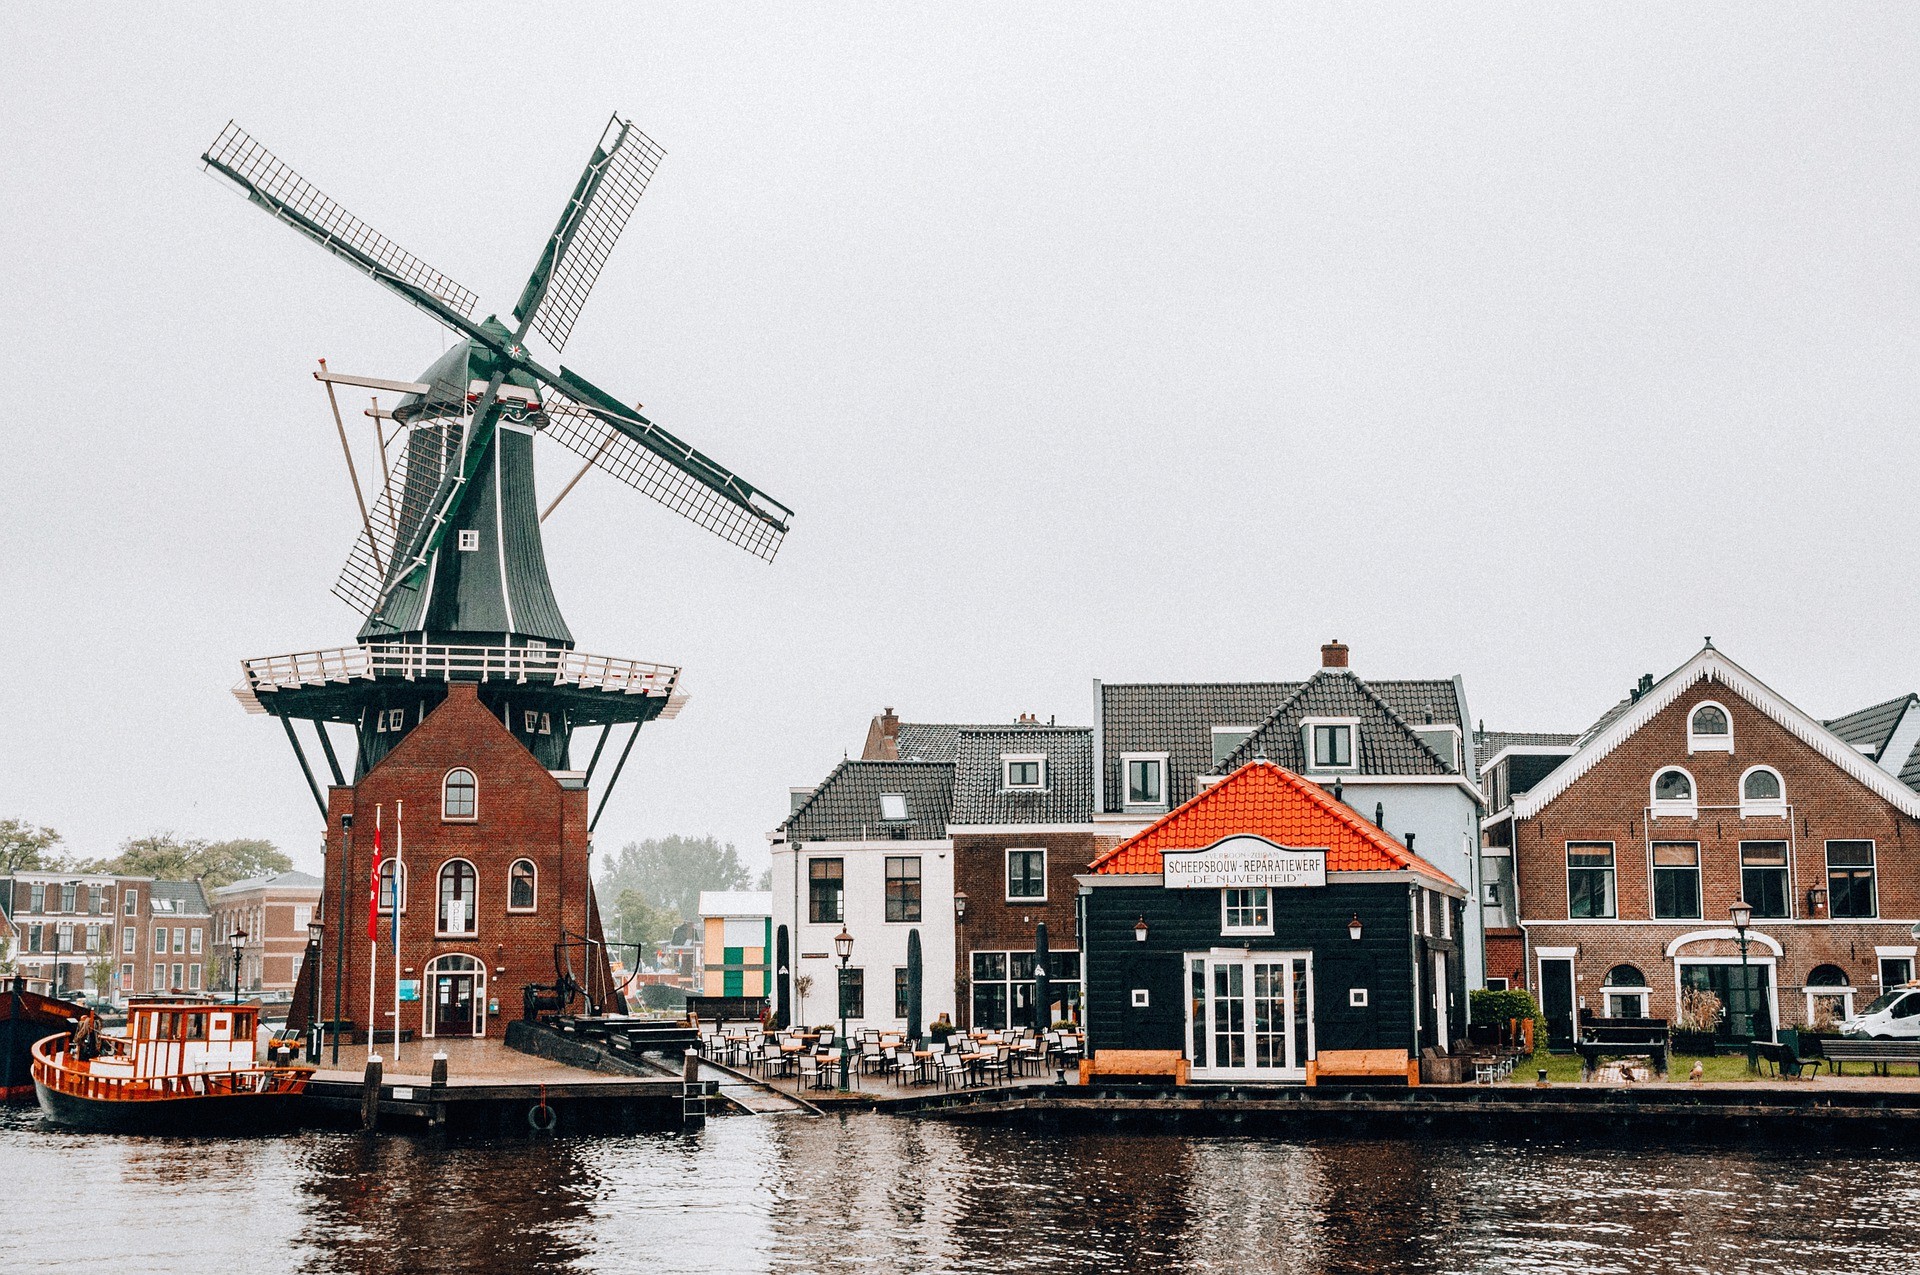 Moving to the Netherlands as an expatriate can be a wise move